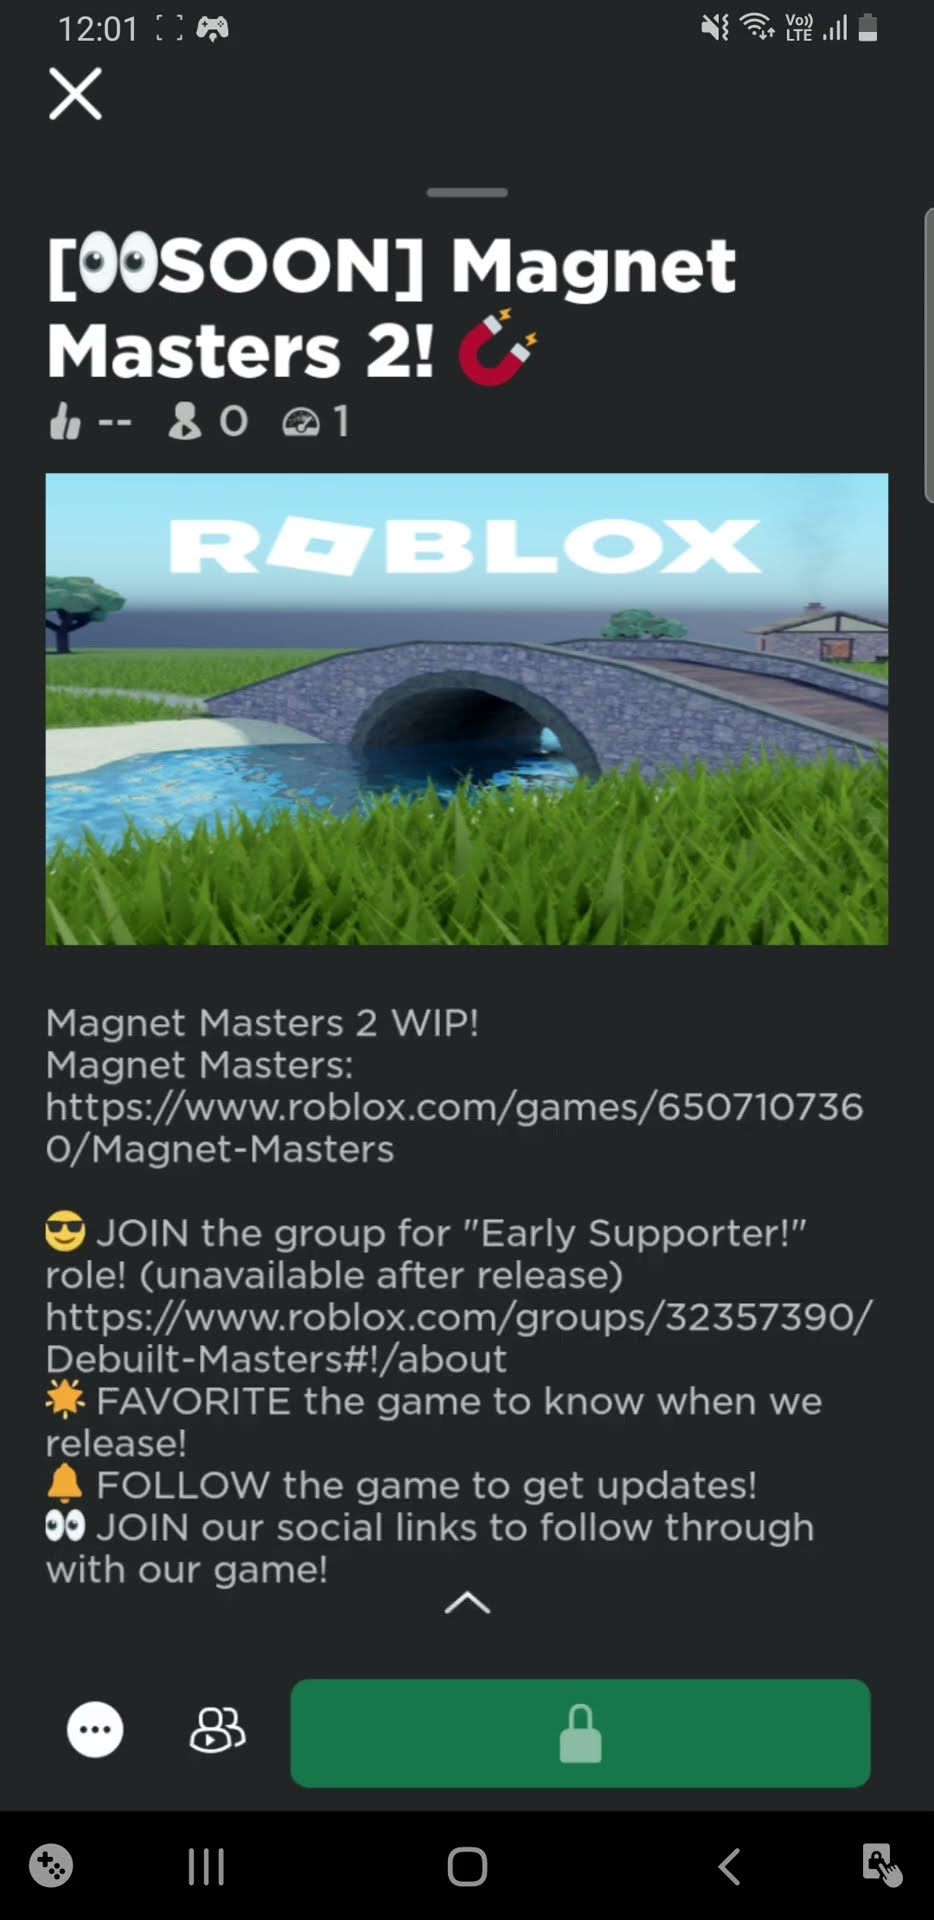 [Soon!] Magnet Masters 2 (Roblox)